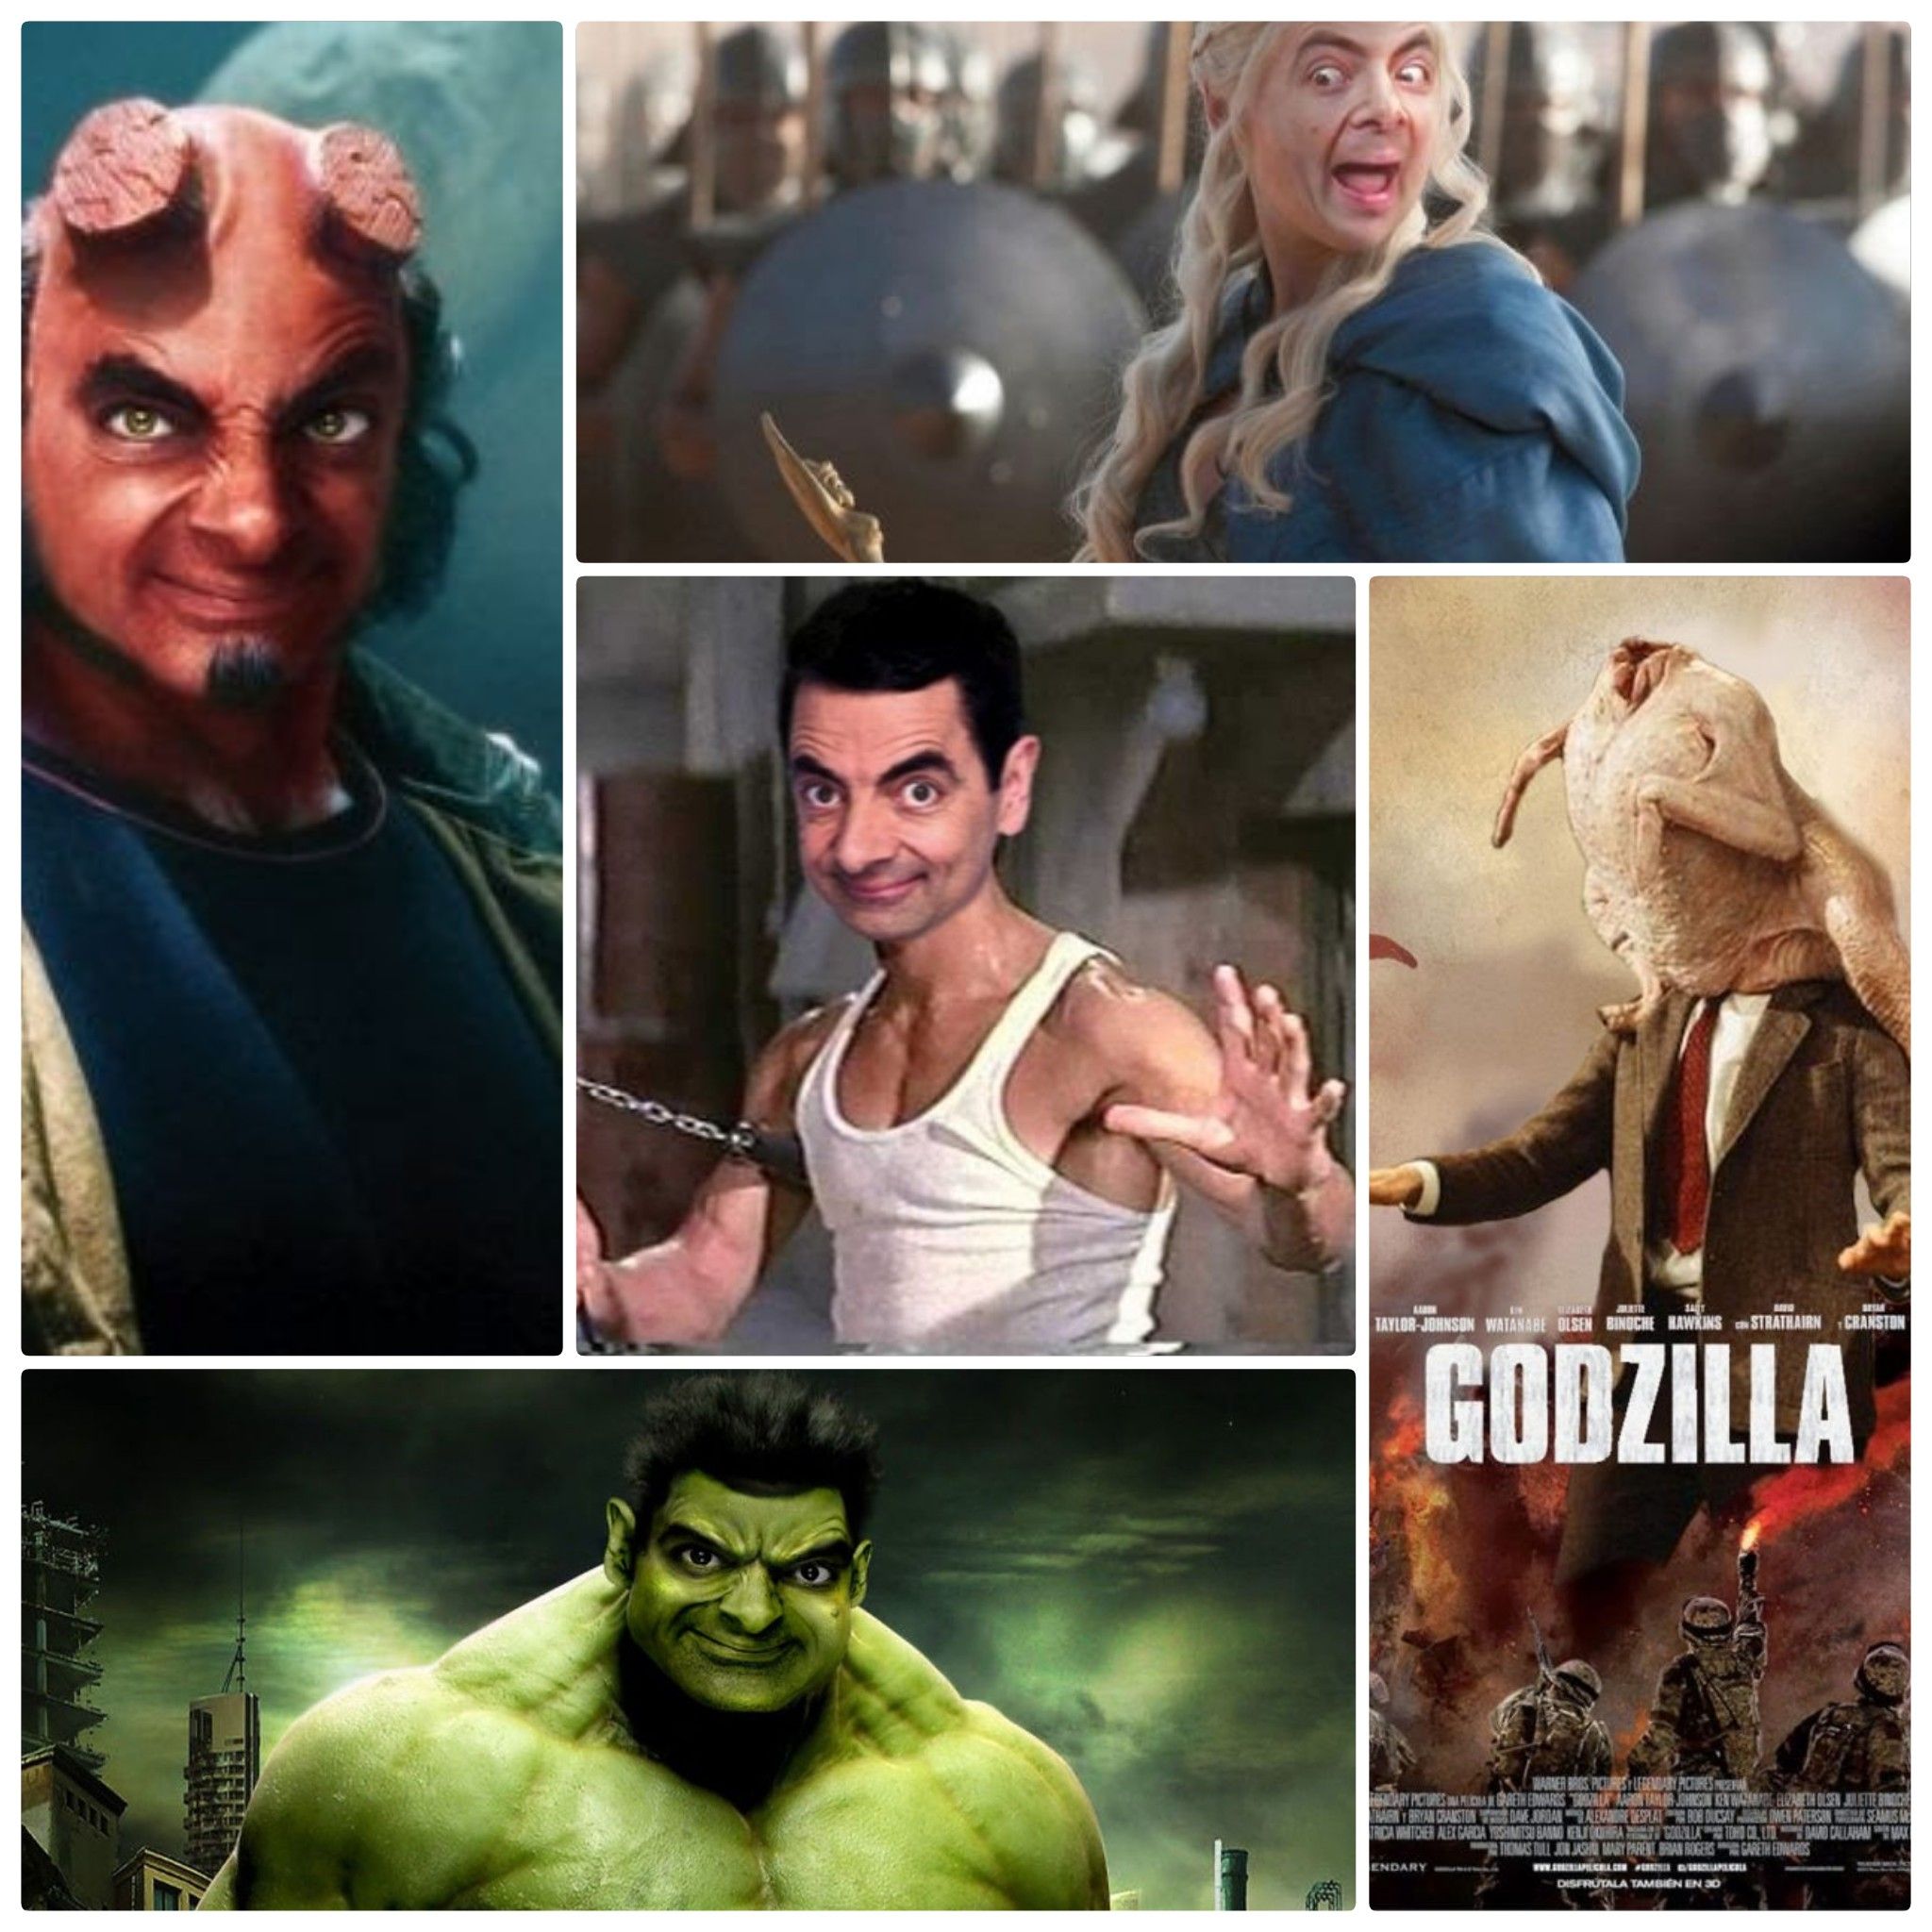 Putting mr. Bean faces on characters is always huilarious